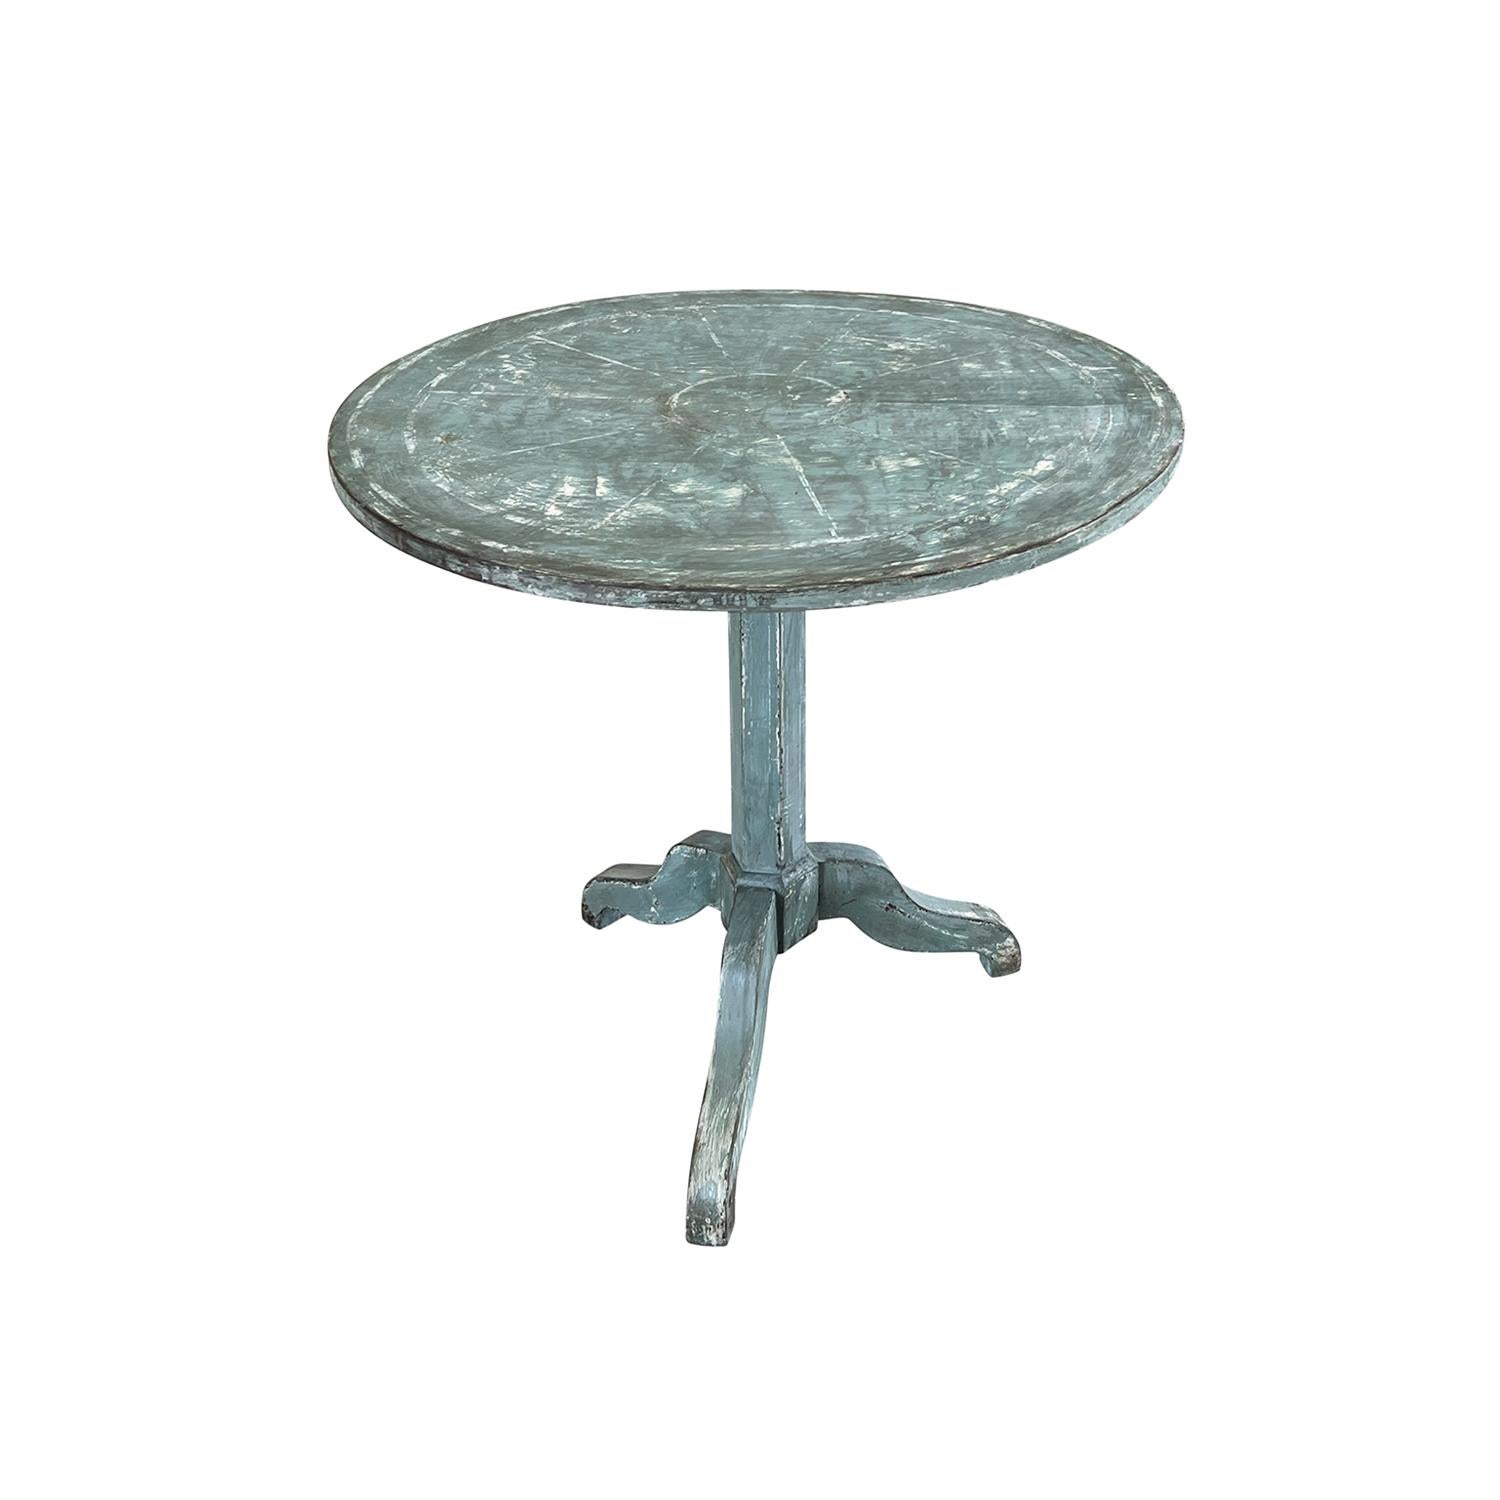 Napoleon III 19th Century French Gueridon Pinewood Side Table - Antique Serving Table For Sale